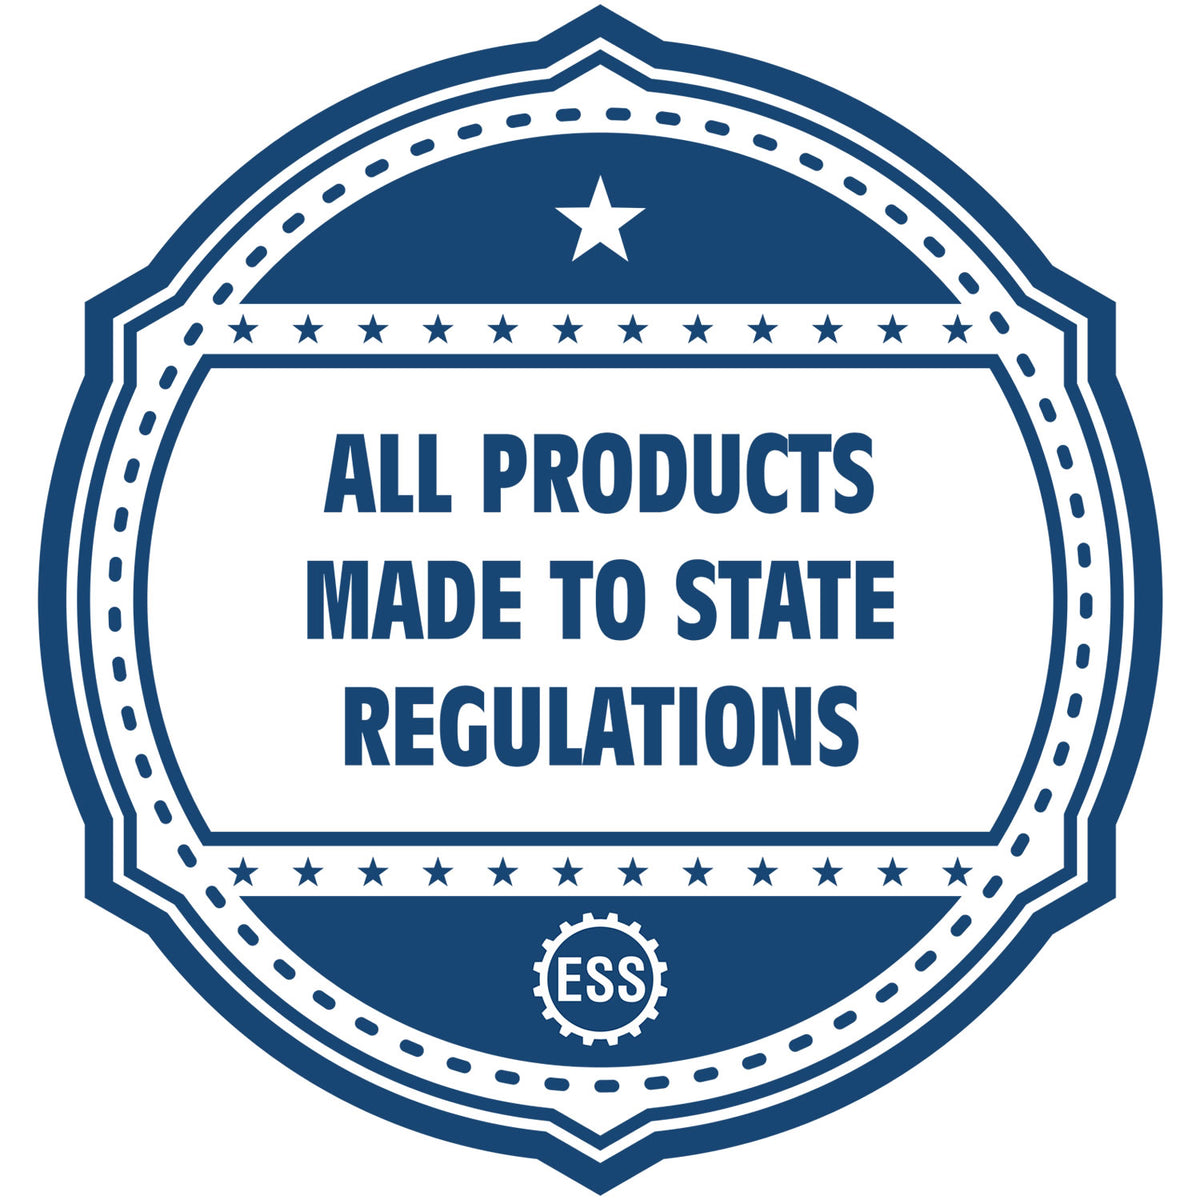 An icon or badge element for the State of West Virginia Soft Land Surveyor Embossing Seal showing that this product is made in compliance with state regulations.